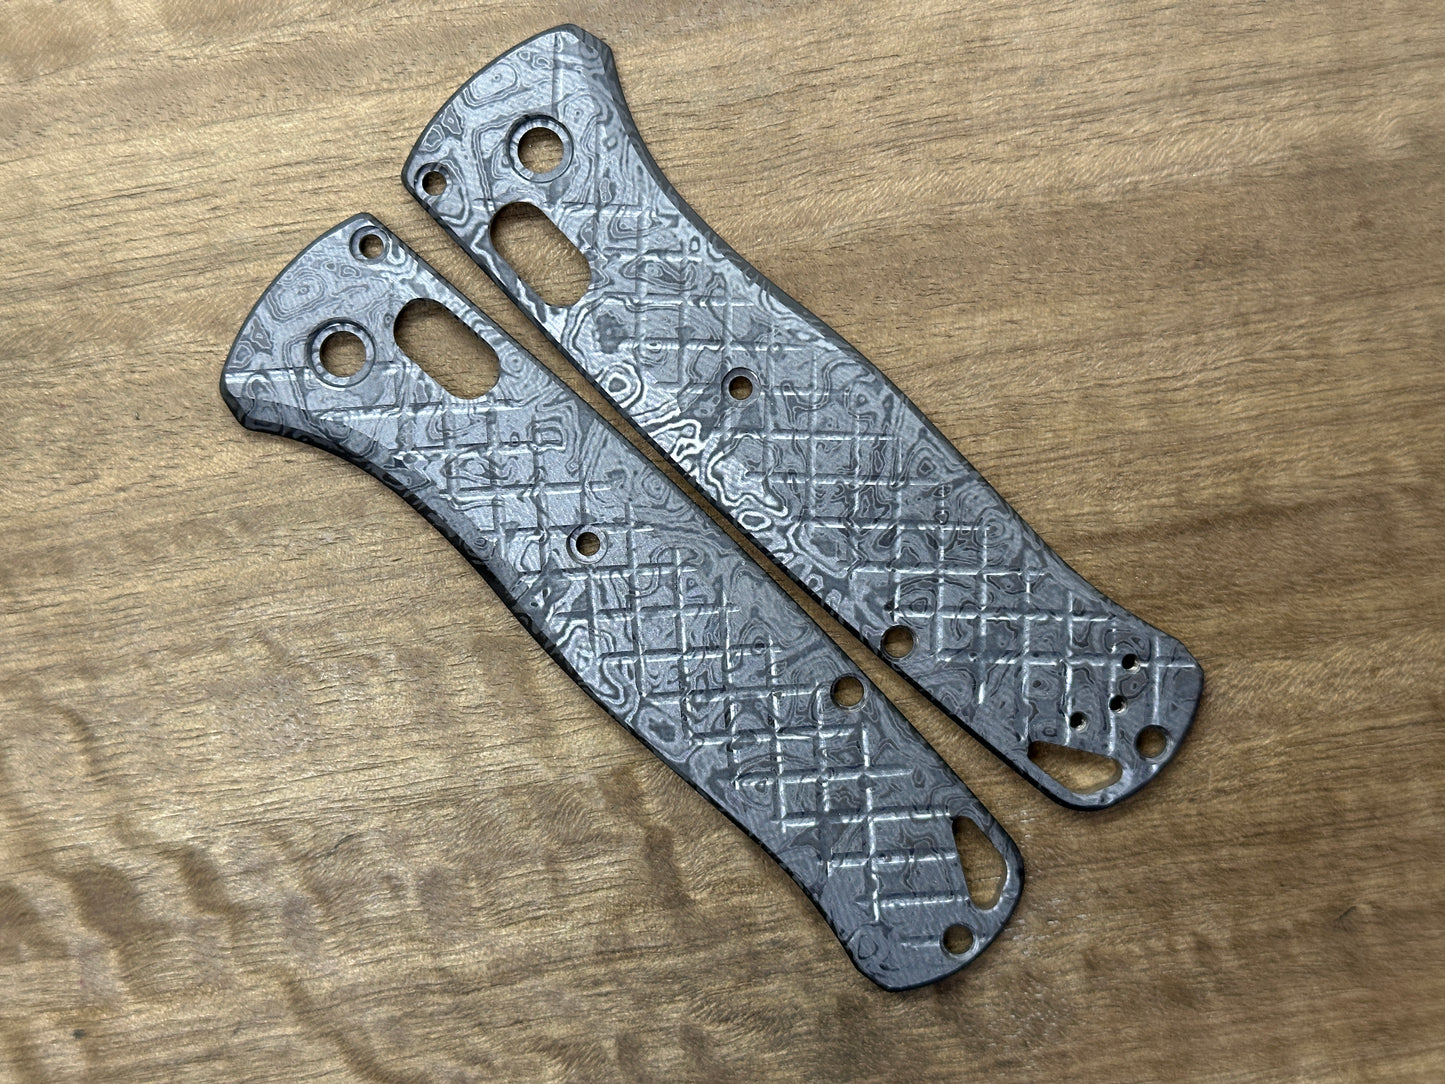 ALIEN Black FRAG Cnc milled Titanium Scales for Benchmade Bugout 535